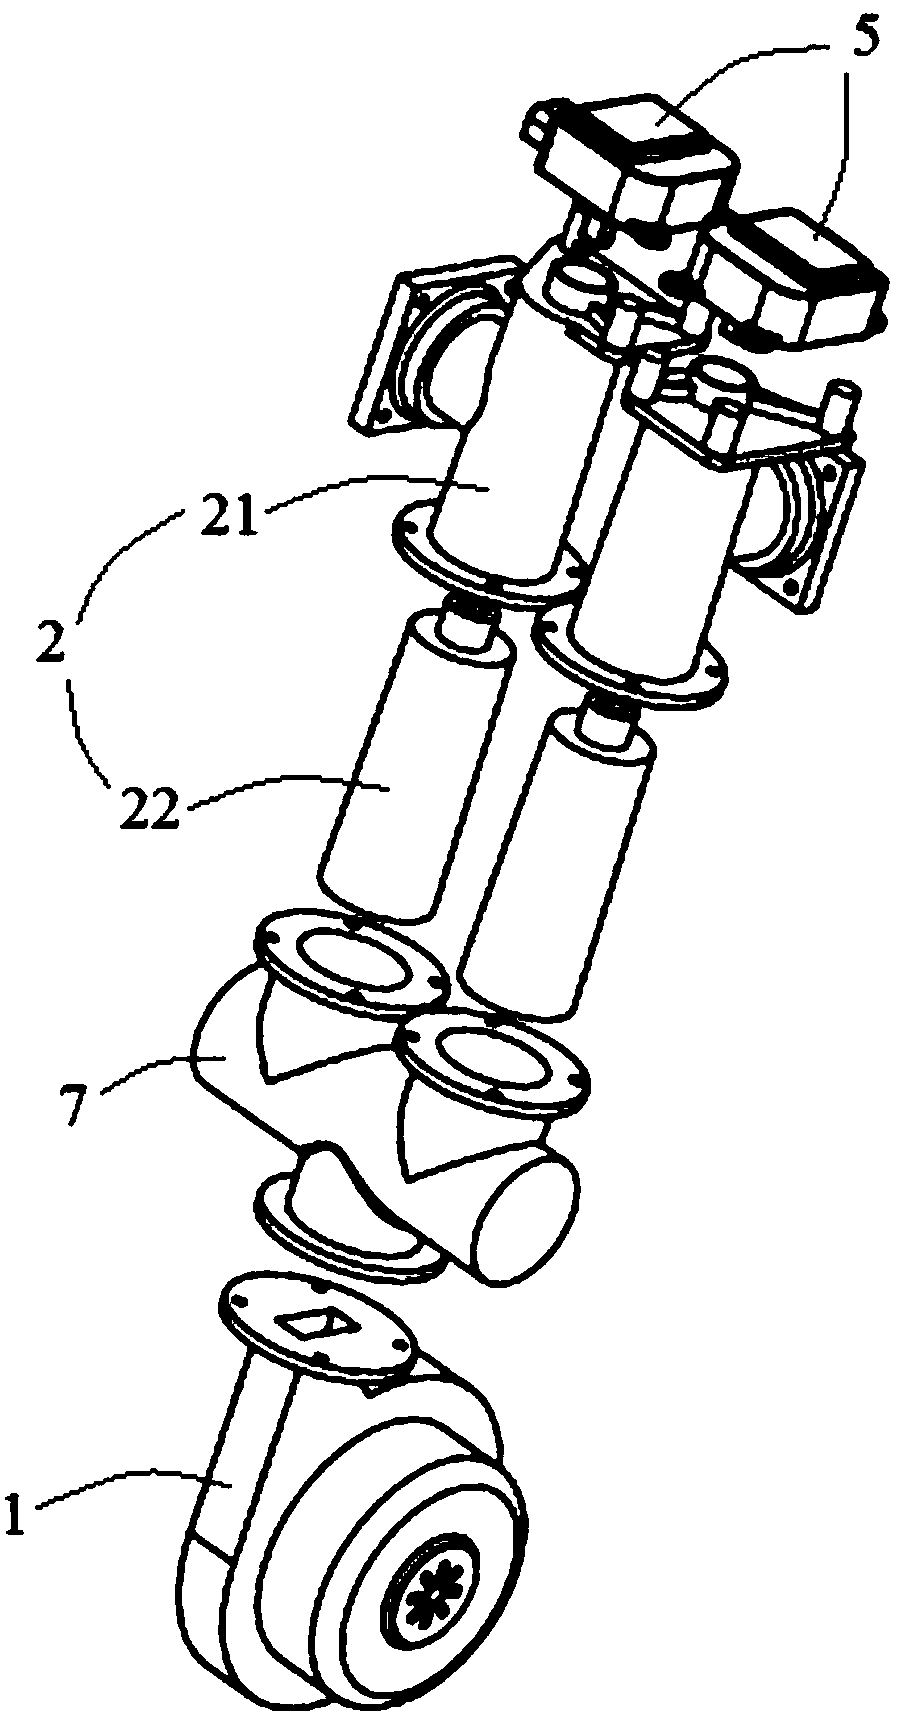 Air supply device and combined heat and power system